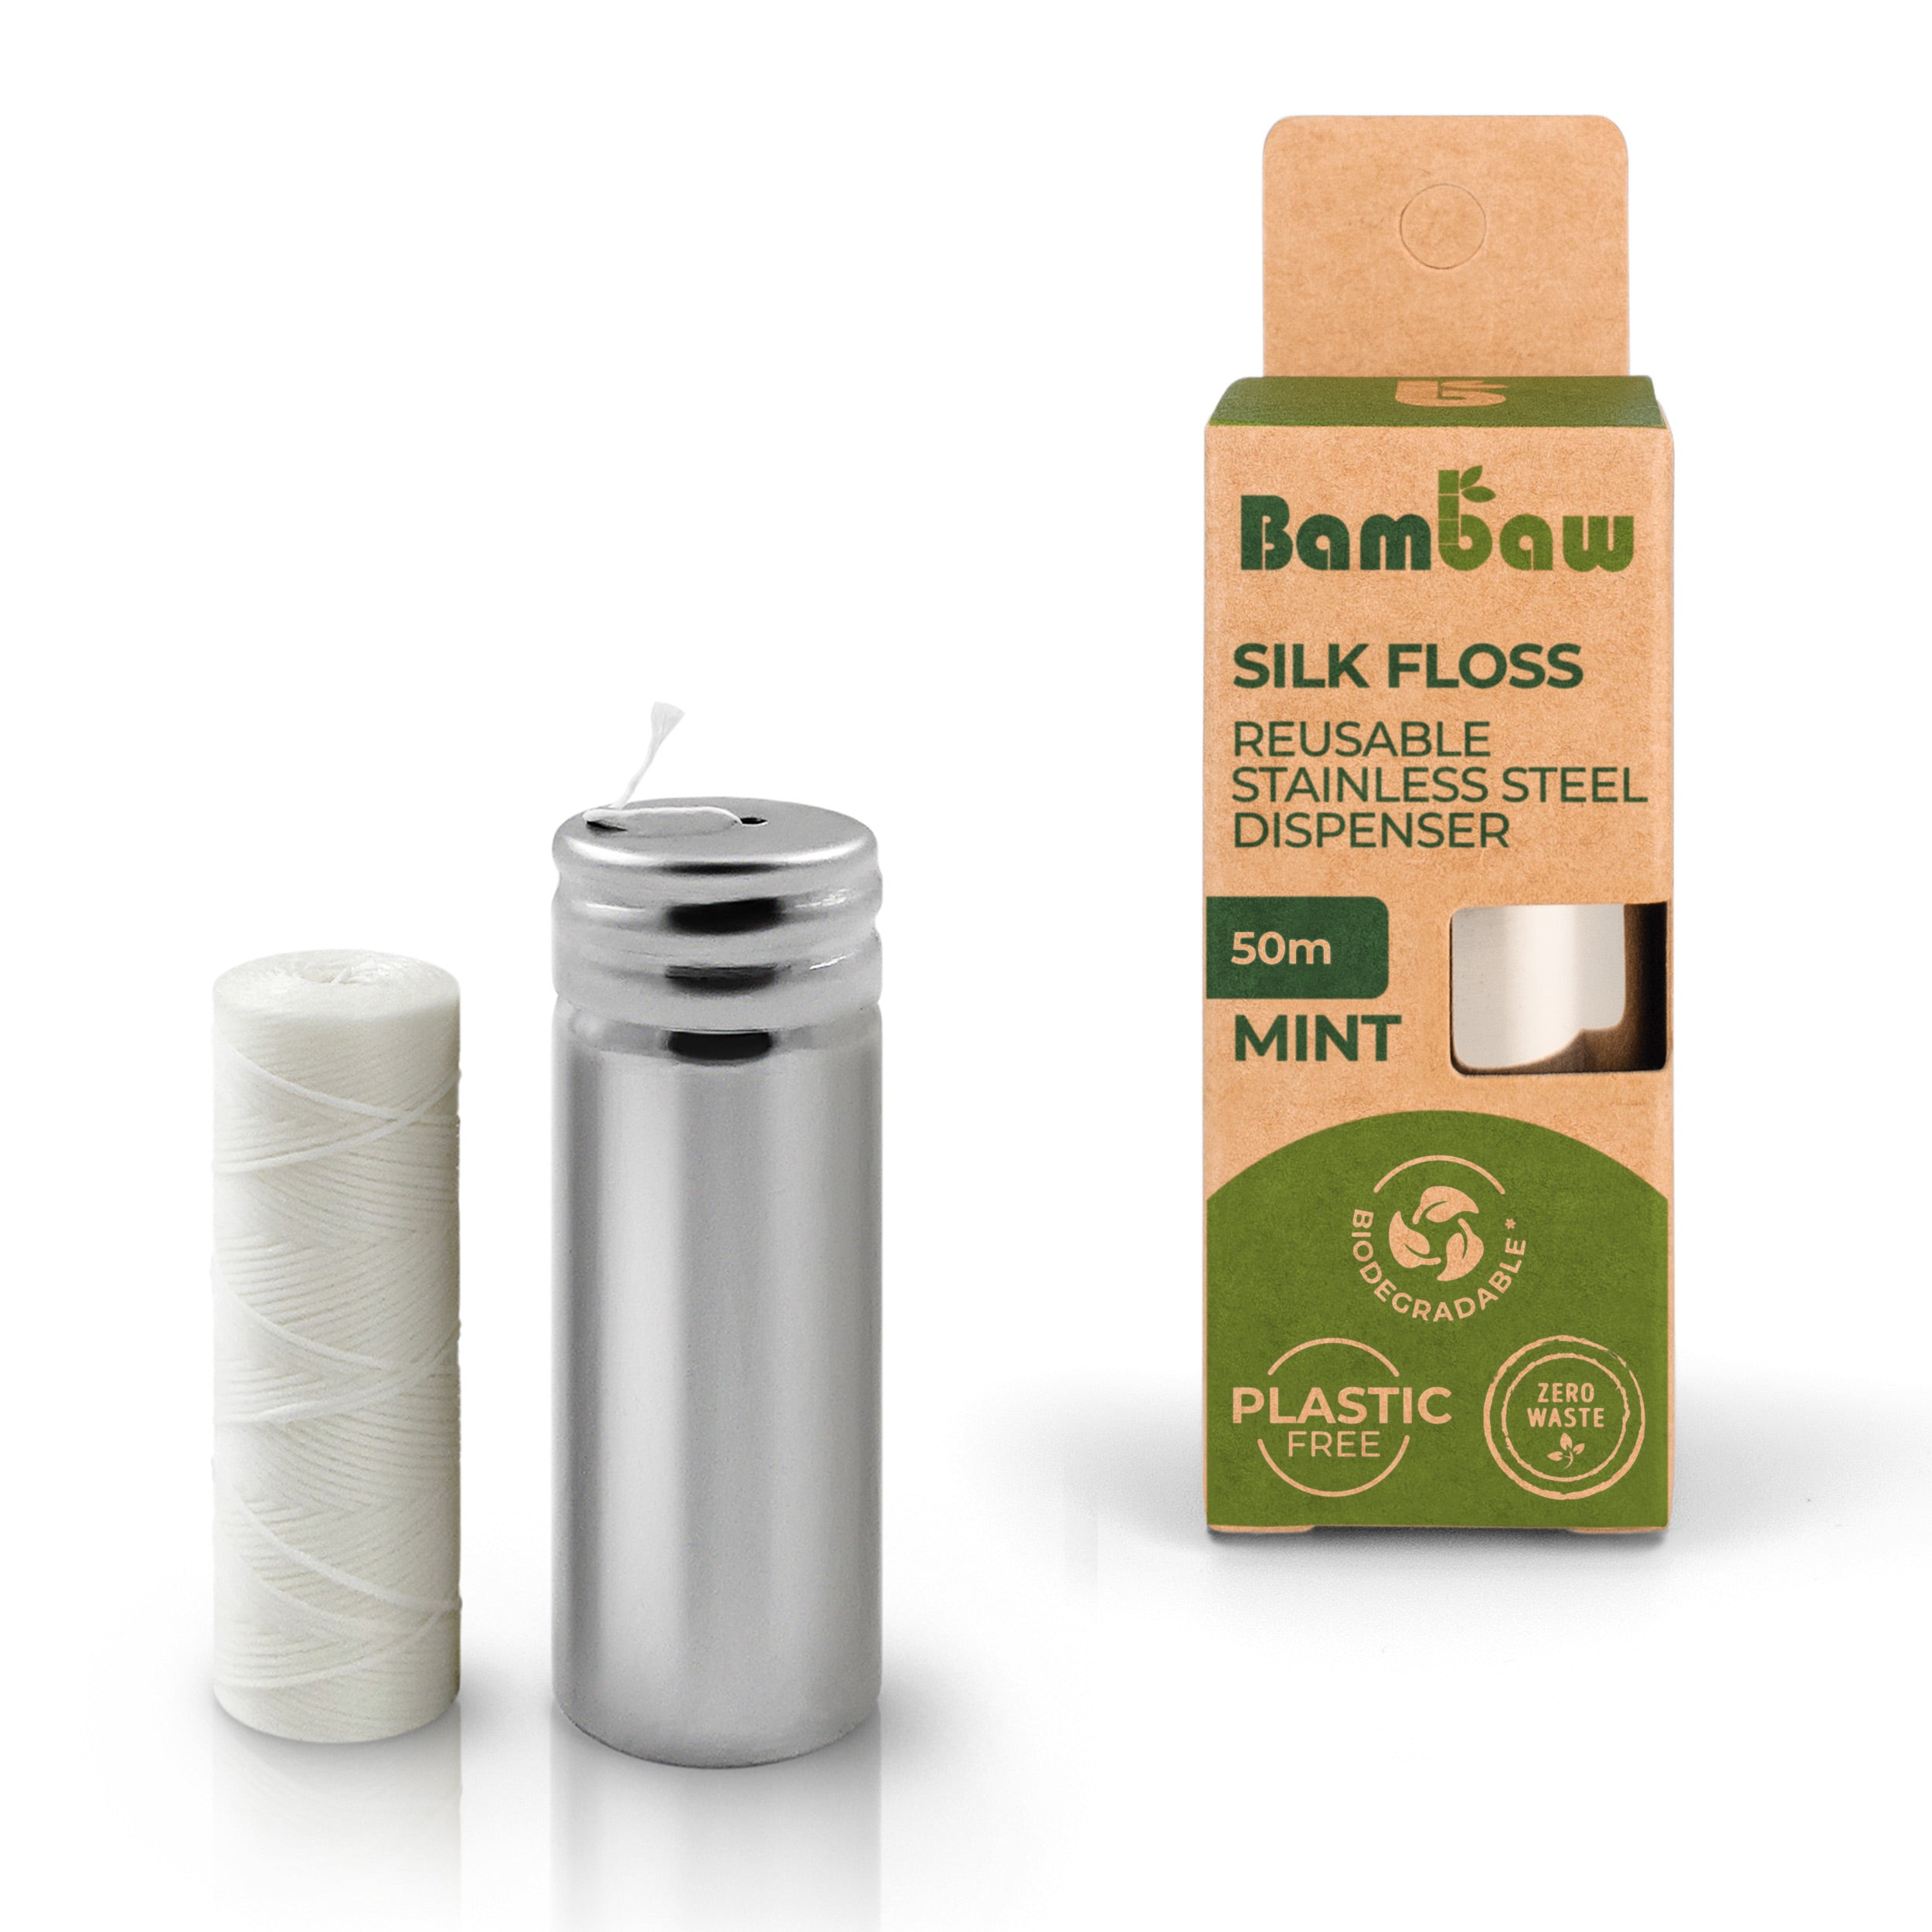 MABLE® Silk Dental Floss in stainless steel, refillable container. - MABLE ®